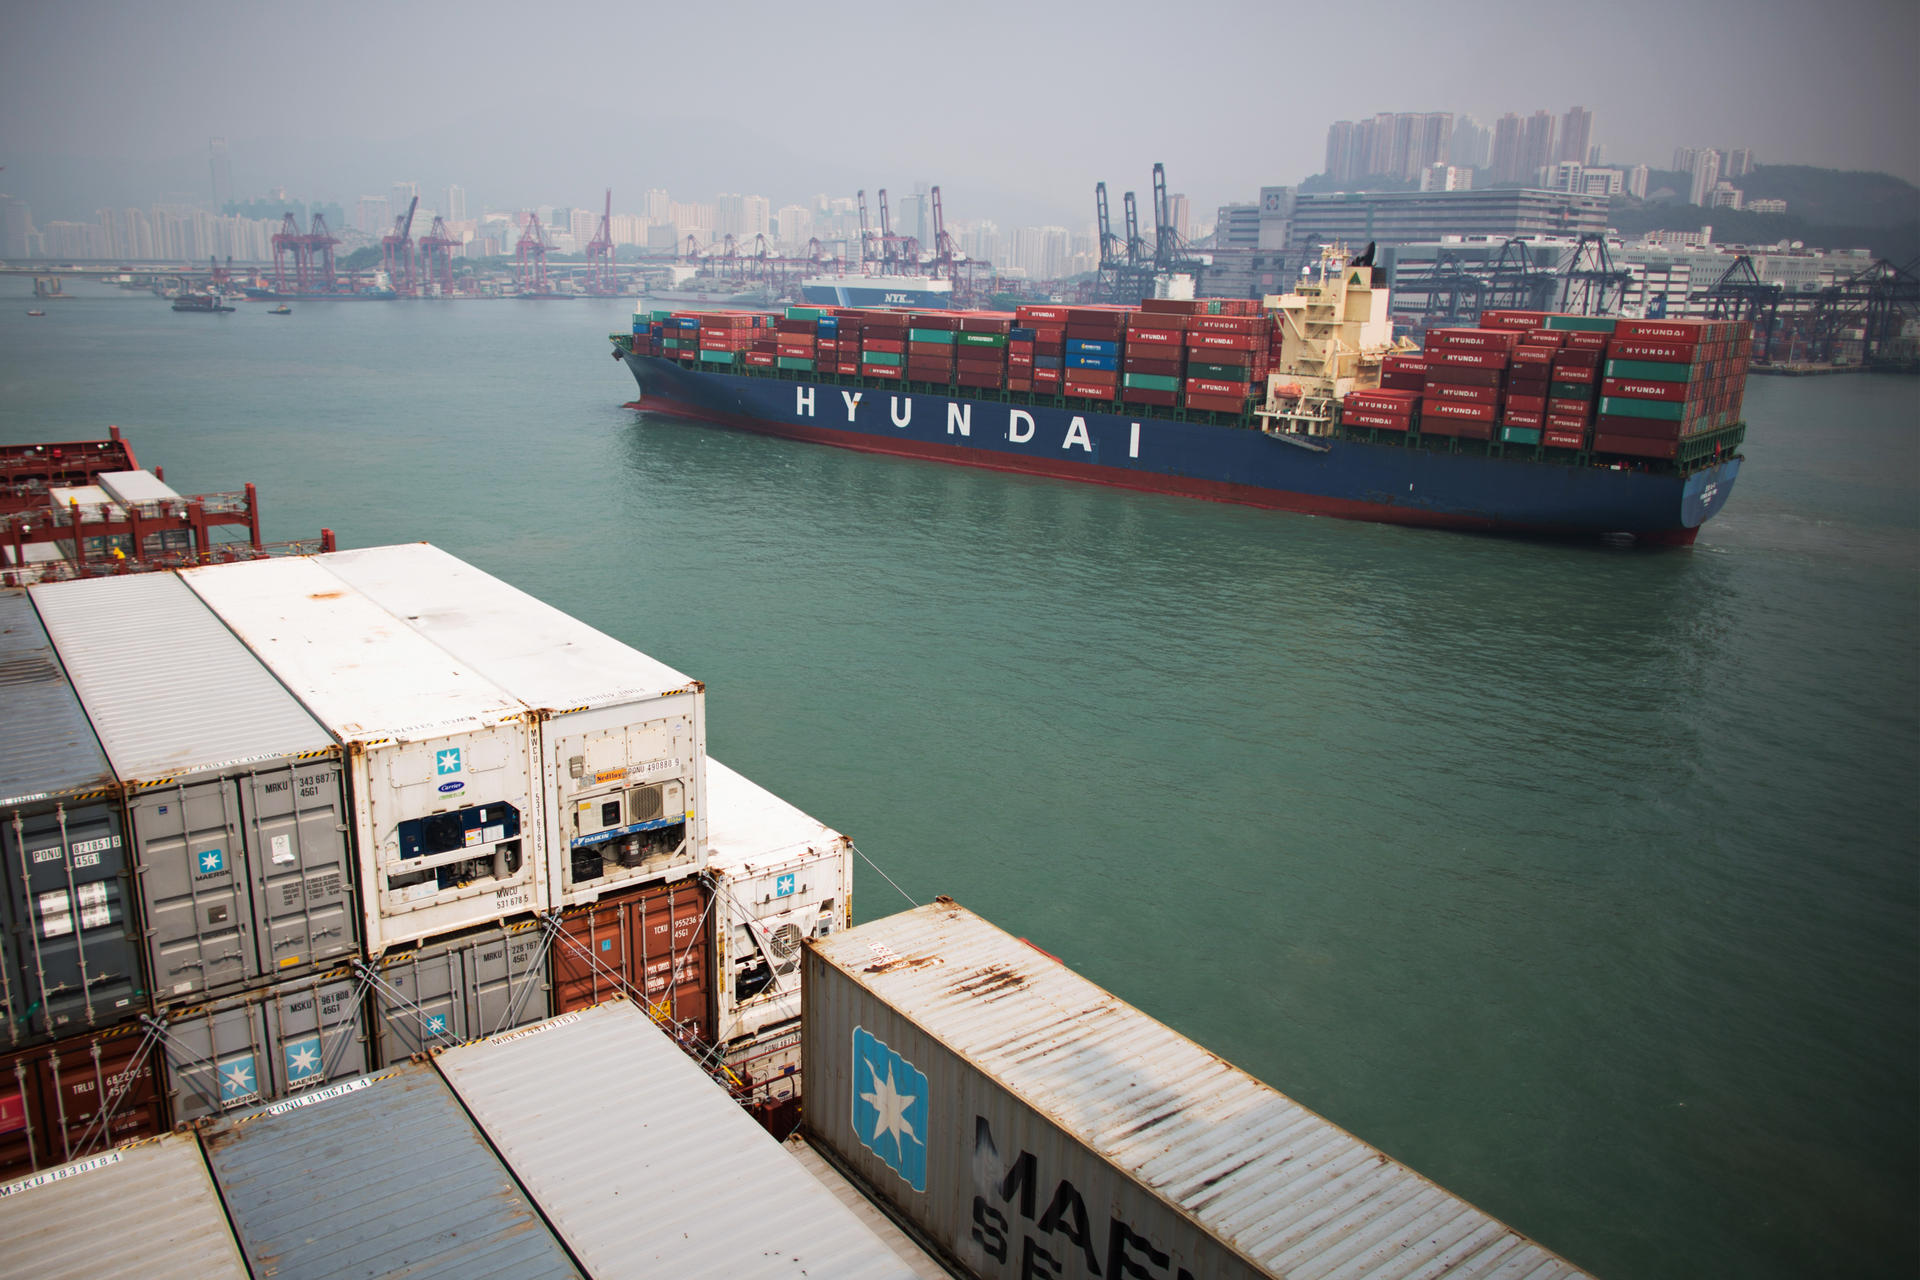 Containers are stacked aboard cargo ships in Hong Kong. The city's status as a shipping hub has eroded in recent years. Photo: Bloomberg